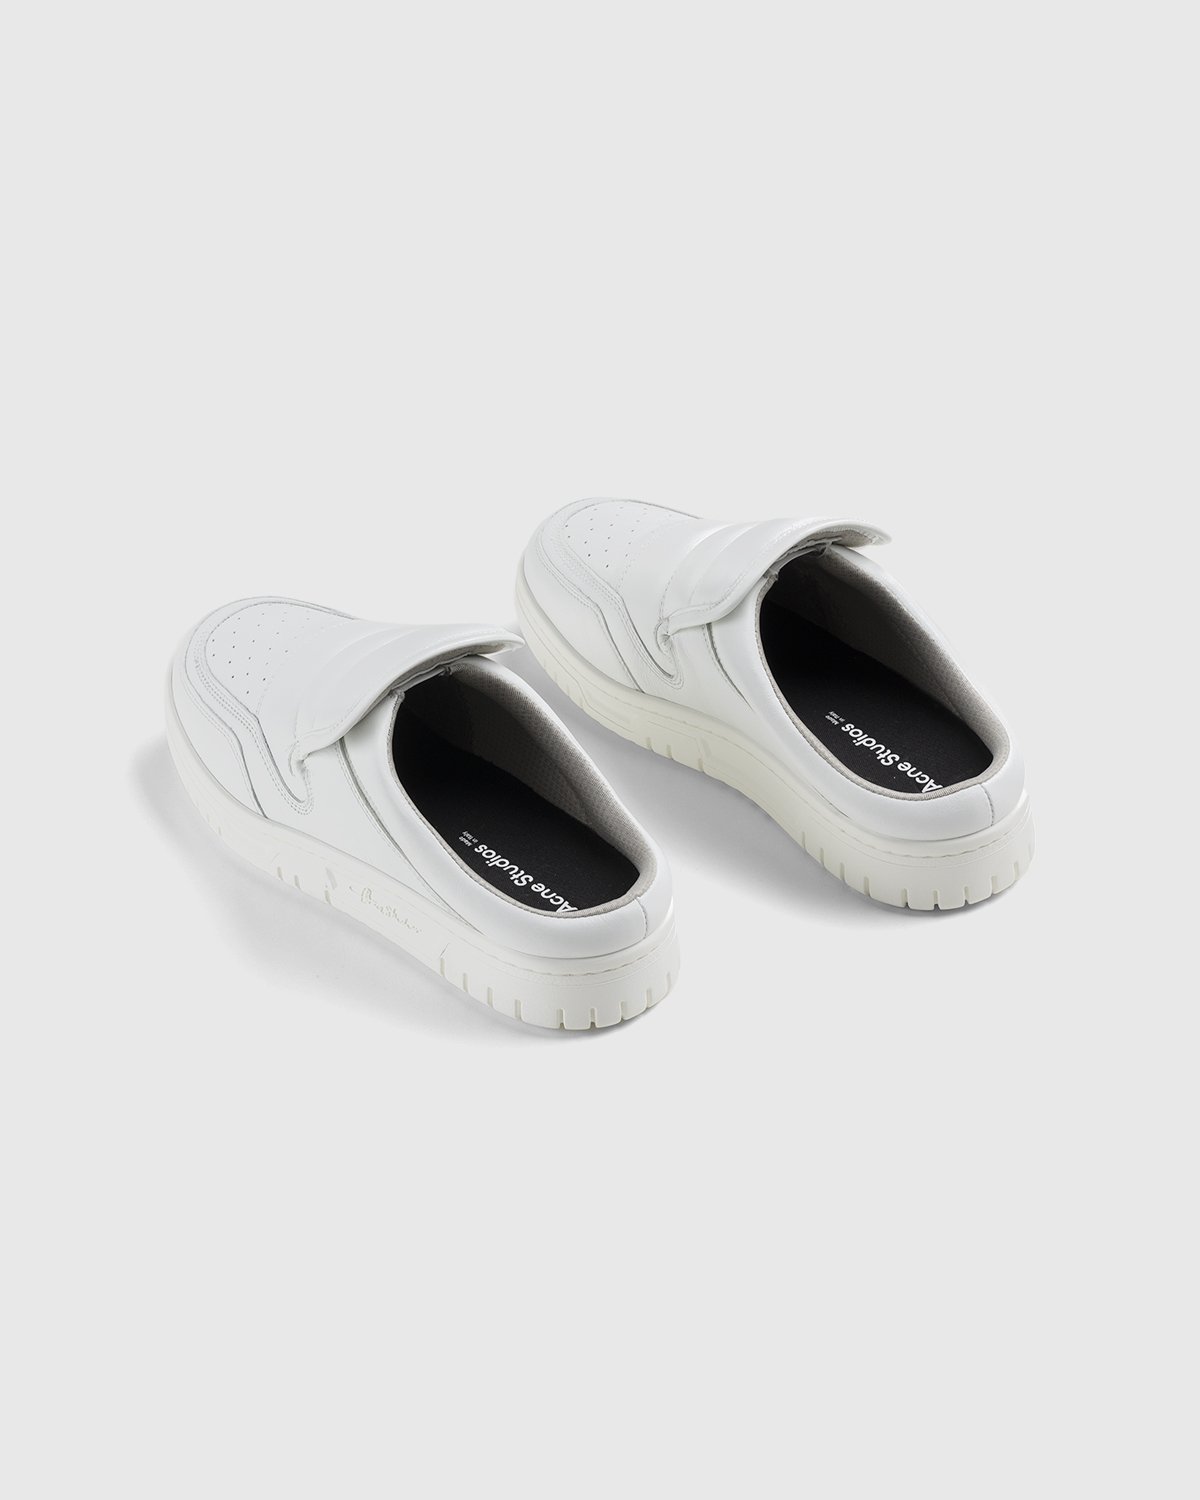 Acne Studios - Cow Leather Mule White - Footwear - White - Image 4